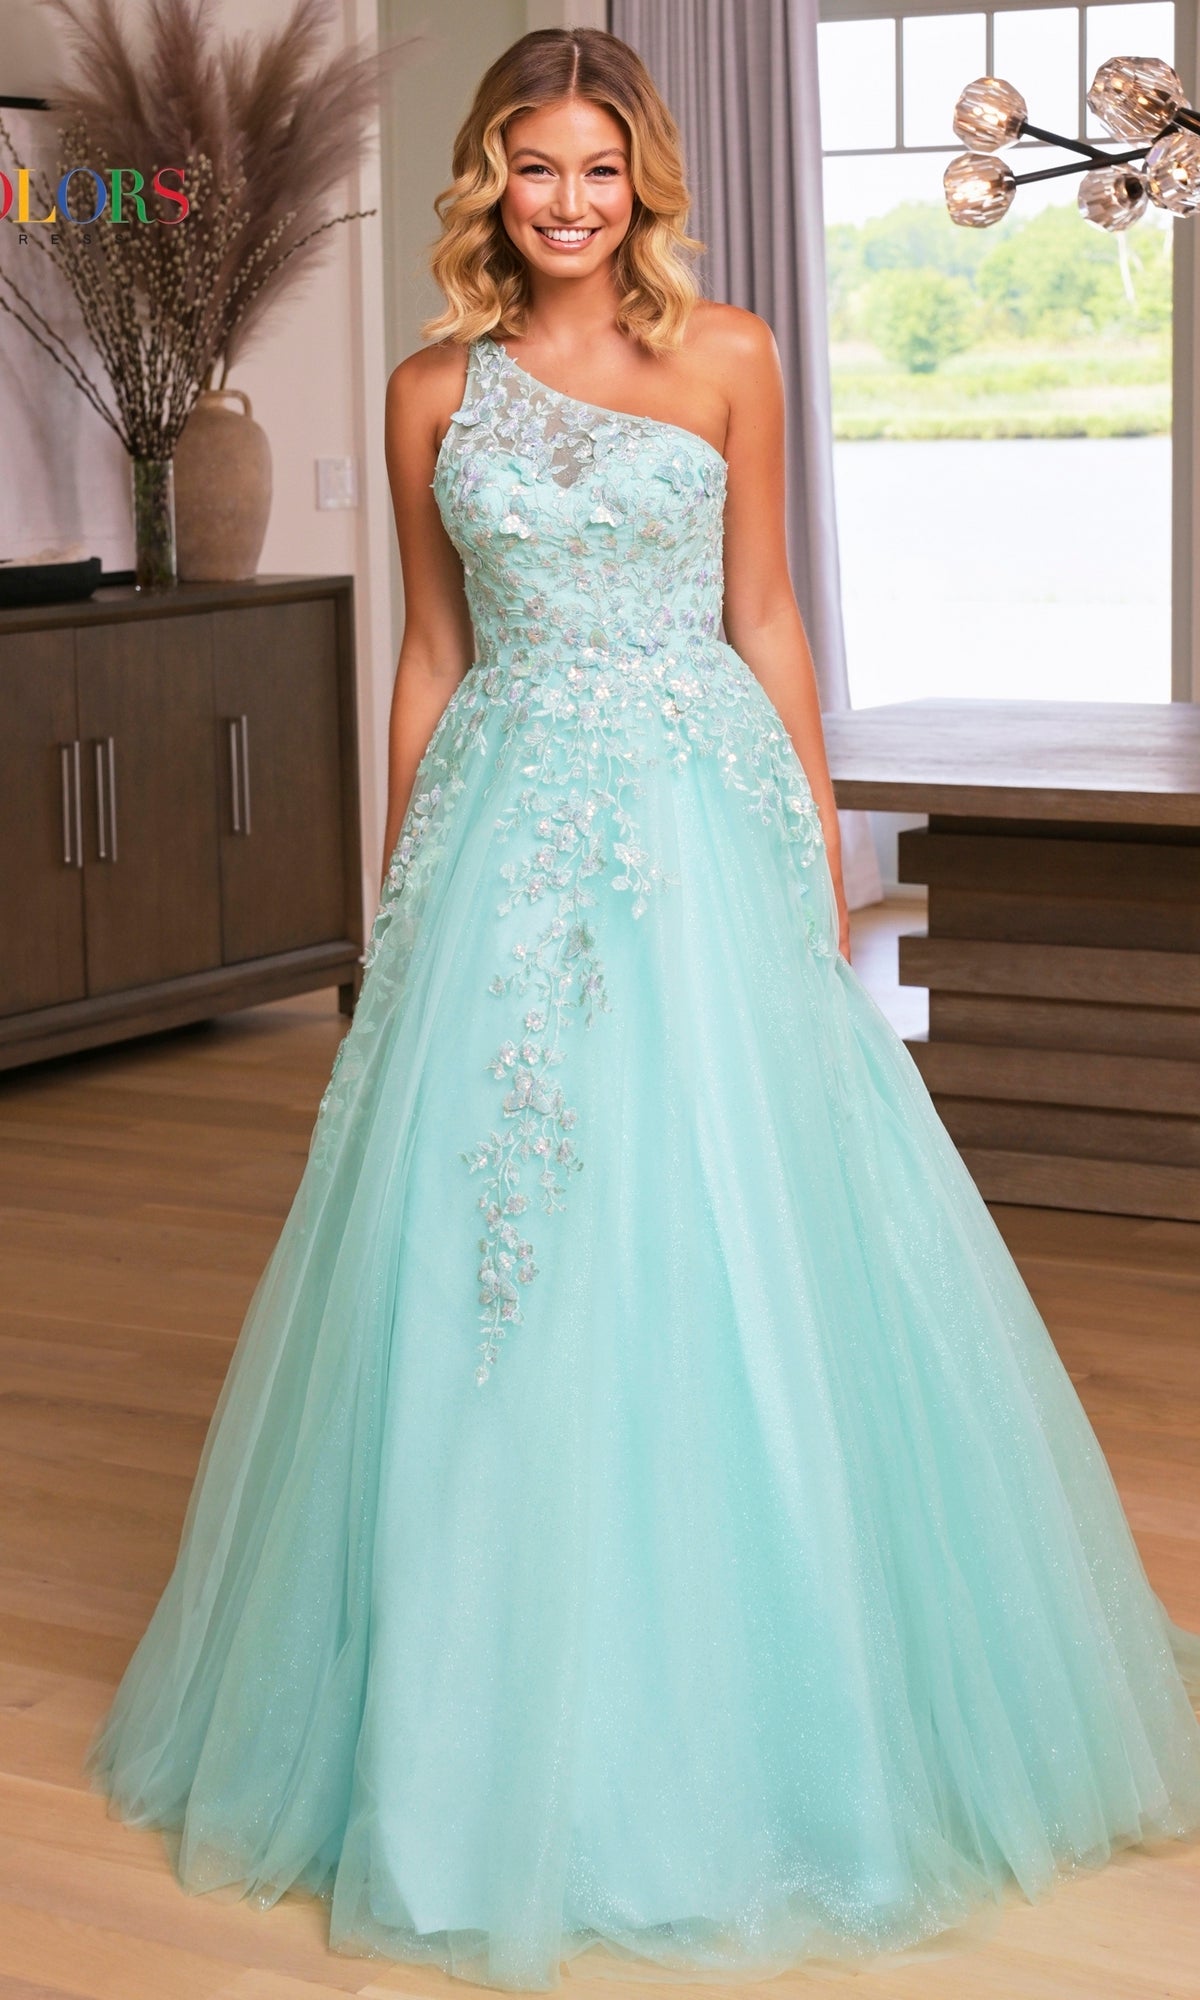 Butterfly One-Shoulder Long Prom Ball Gown 3217